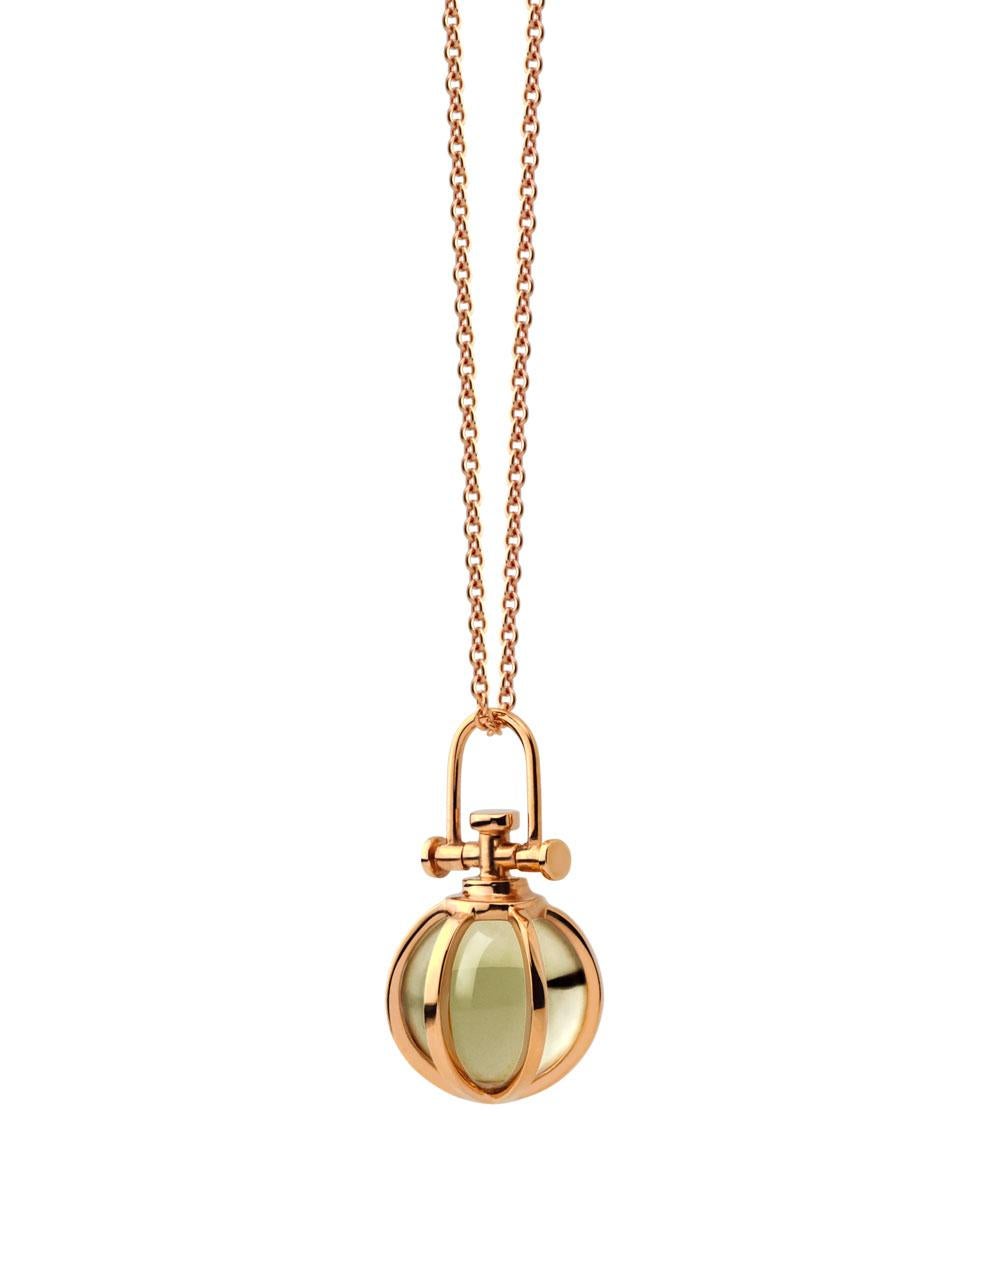 Rebecca Li designs mindfulness. 
This dainty orb necklace is from her Crystal Ball Collection.
Green amethyst means Harmony, Calm & Relaxation.

Pendant:
Metal Type: 18K Rose Gold
Gemstone: Green Amethyst
Pendant Size: 9 mm W * 9 mm D * 17 mm